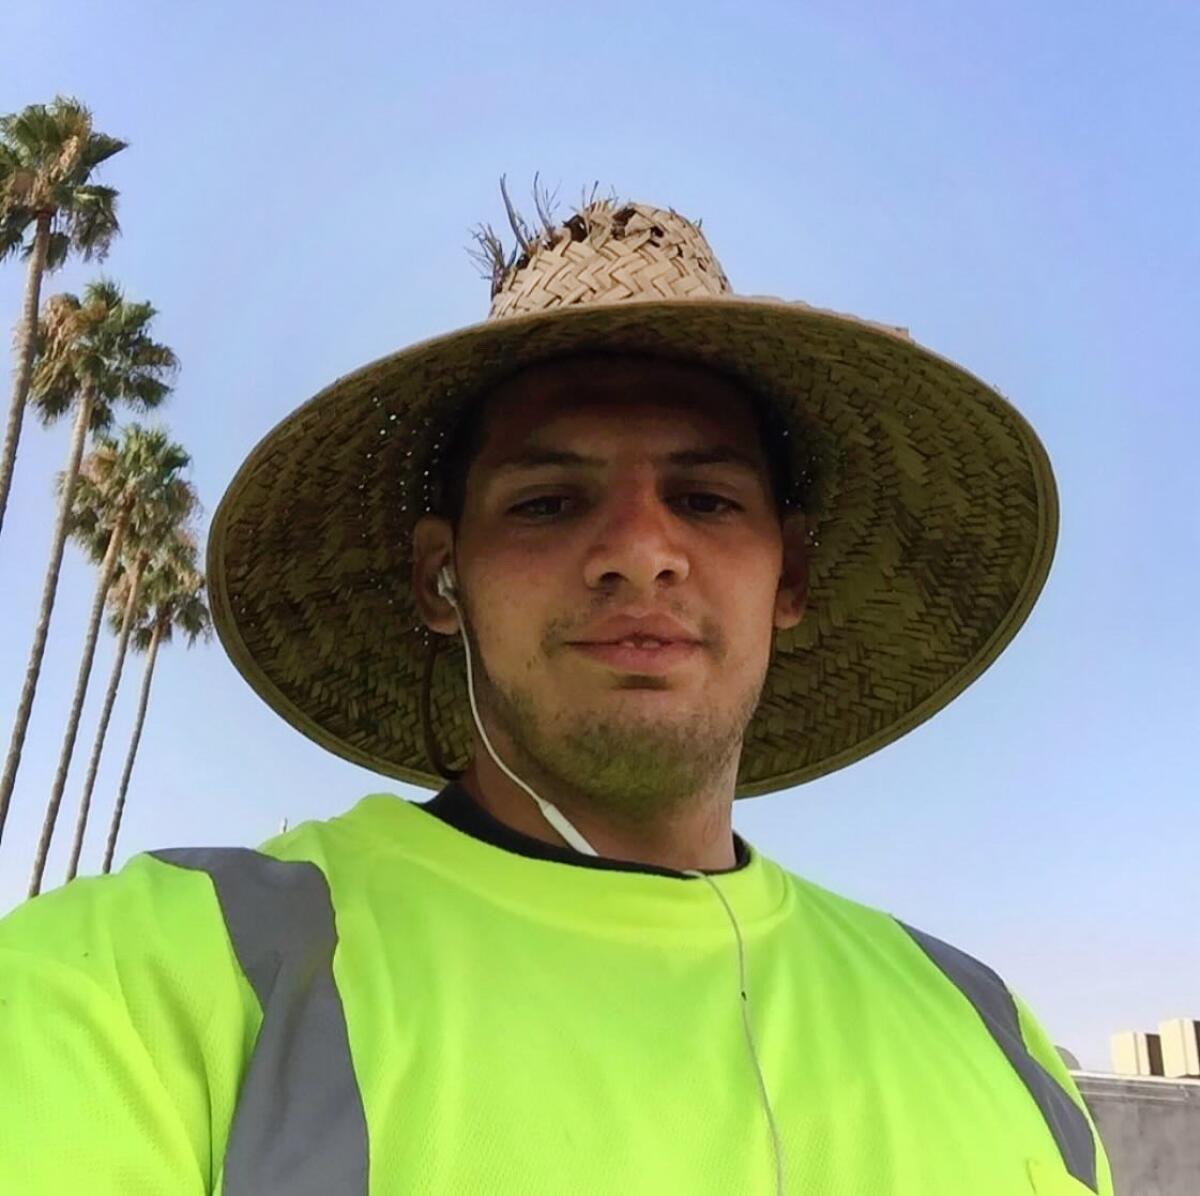 A self-portrait of Robert Brown wearing a neon yellow T-shirt, wired headphones, and a wicker hat with palm trees in the background.